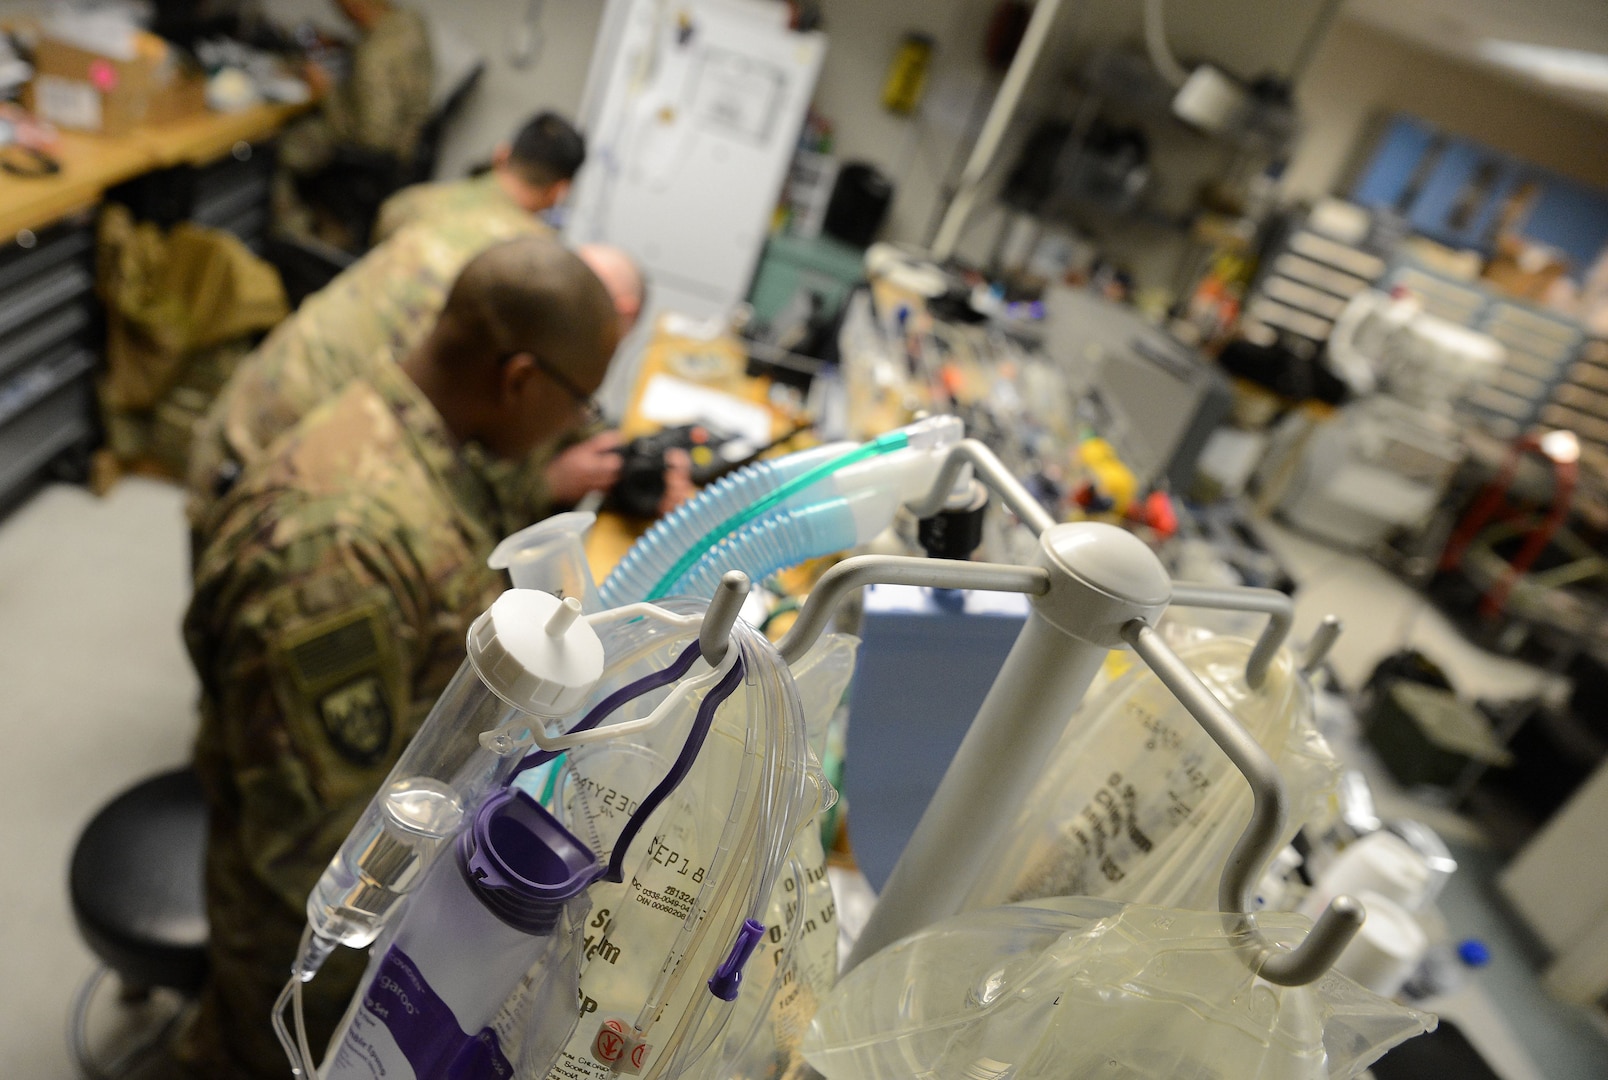 Members of the 455th Expeditionary Medical Operation Squadron clinical engineering team repair medical equipment Jan. 15, 2018 at Craig Joint Theater Hospital in Bagram Airfield, Afghanistan.